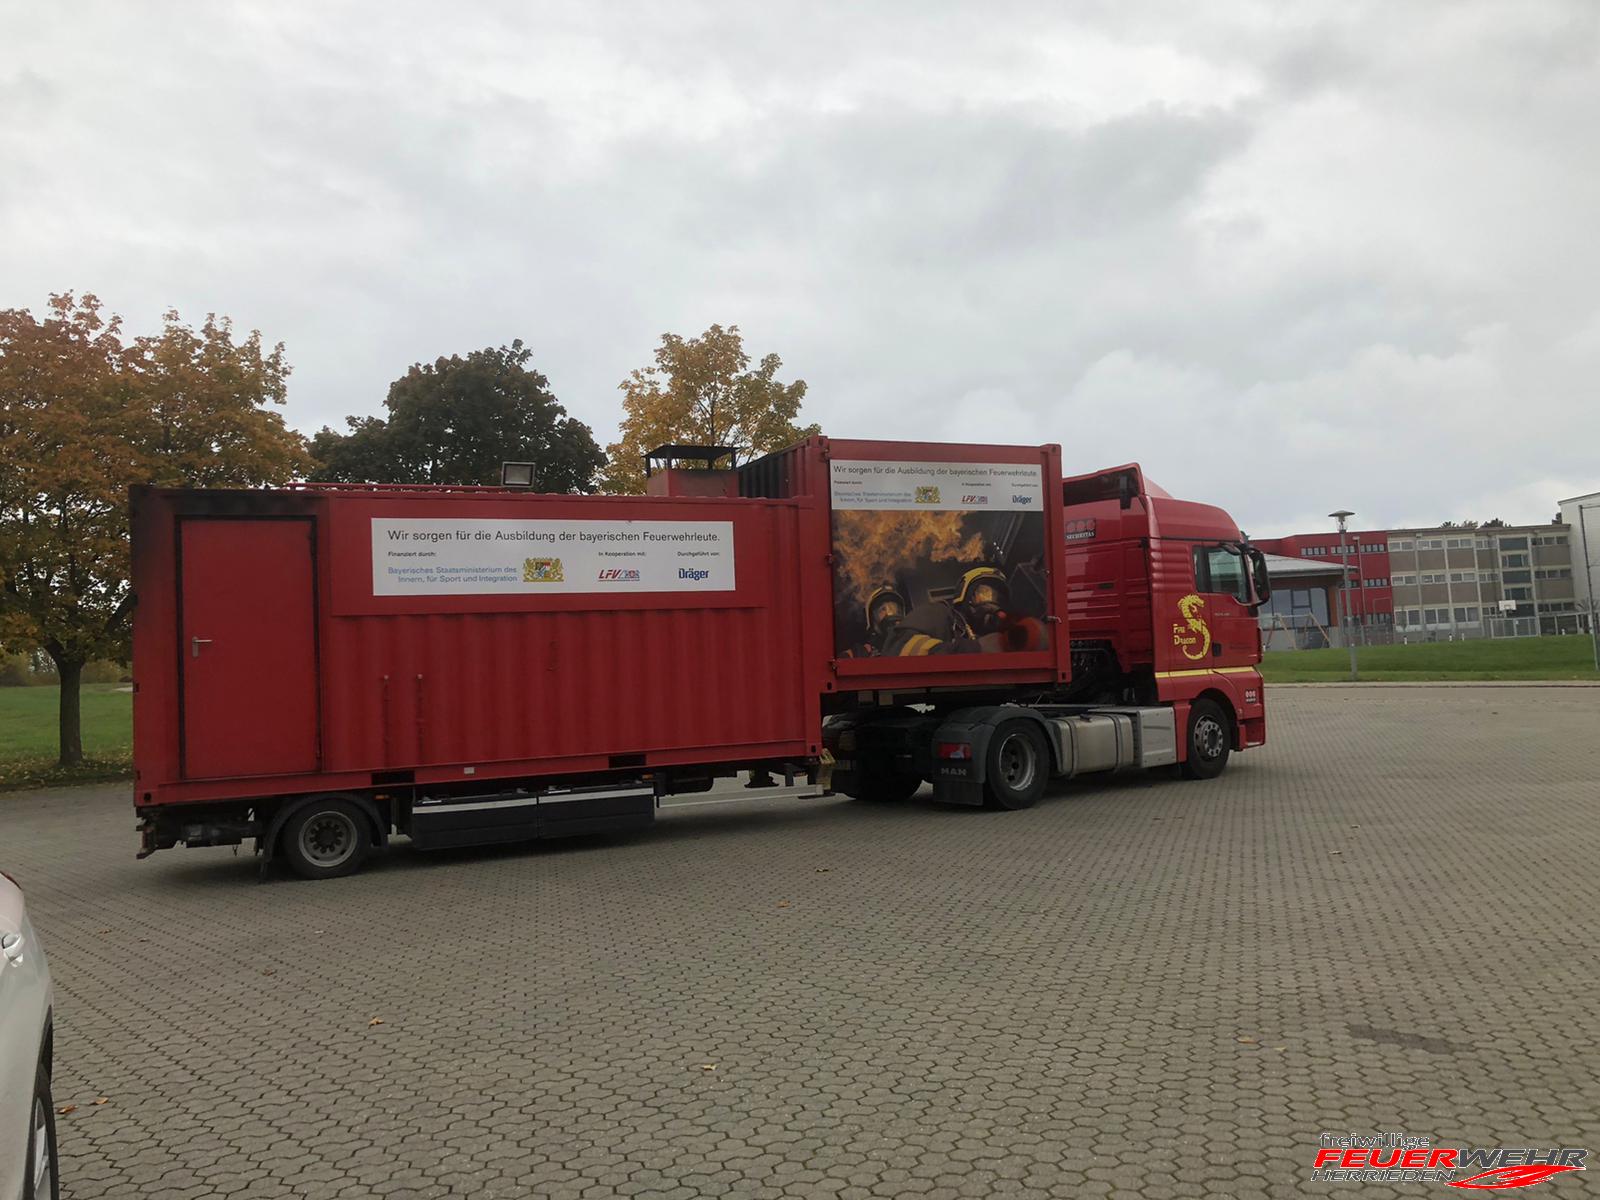 You are currently viewing Brandübungscontainer 2020 in Schopfloch